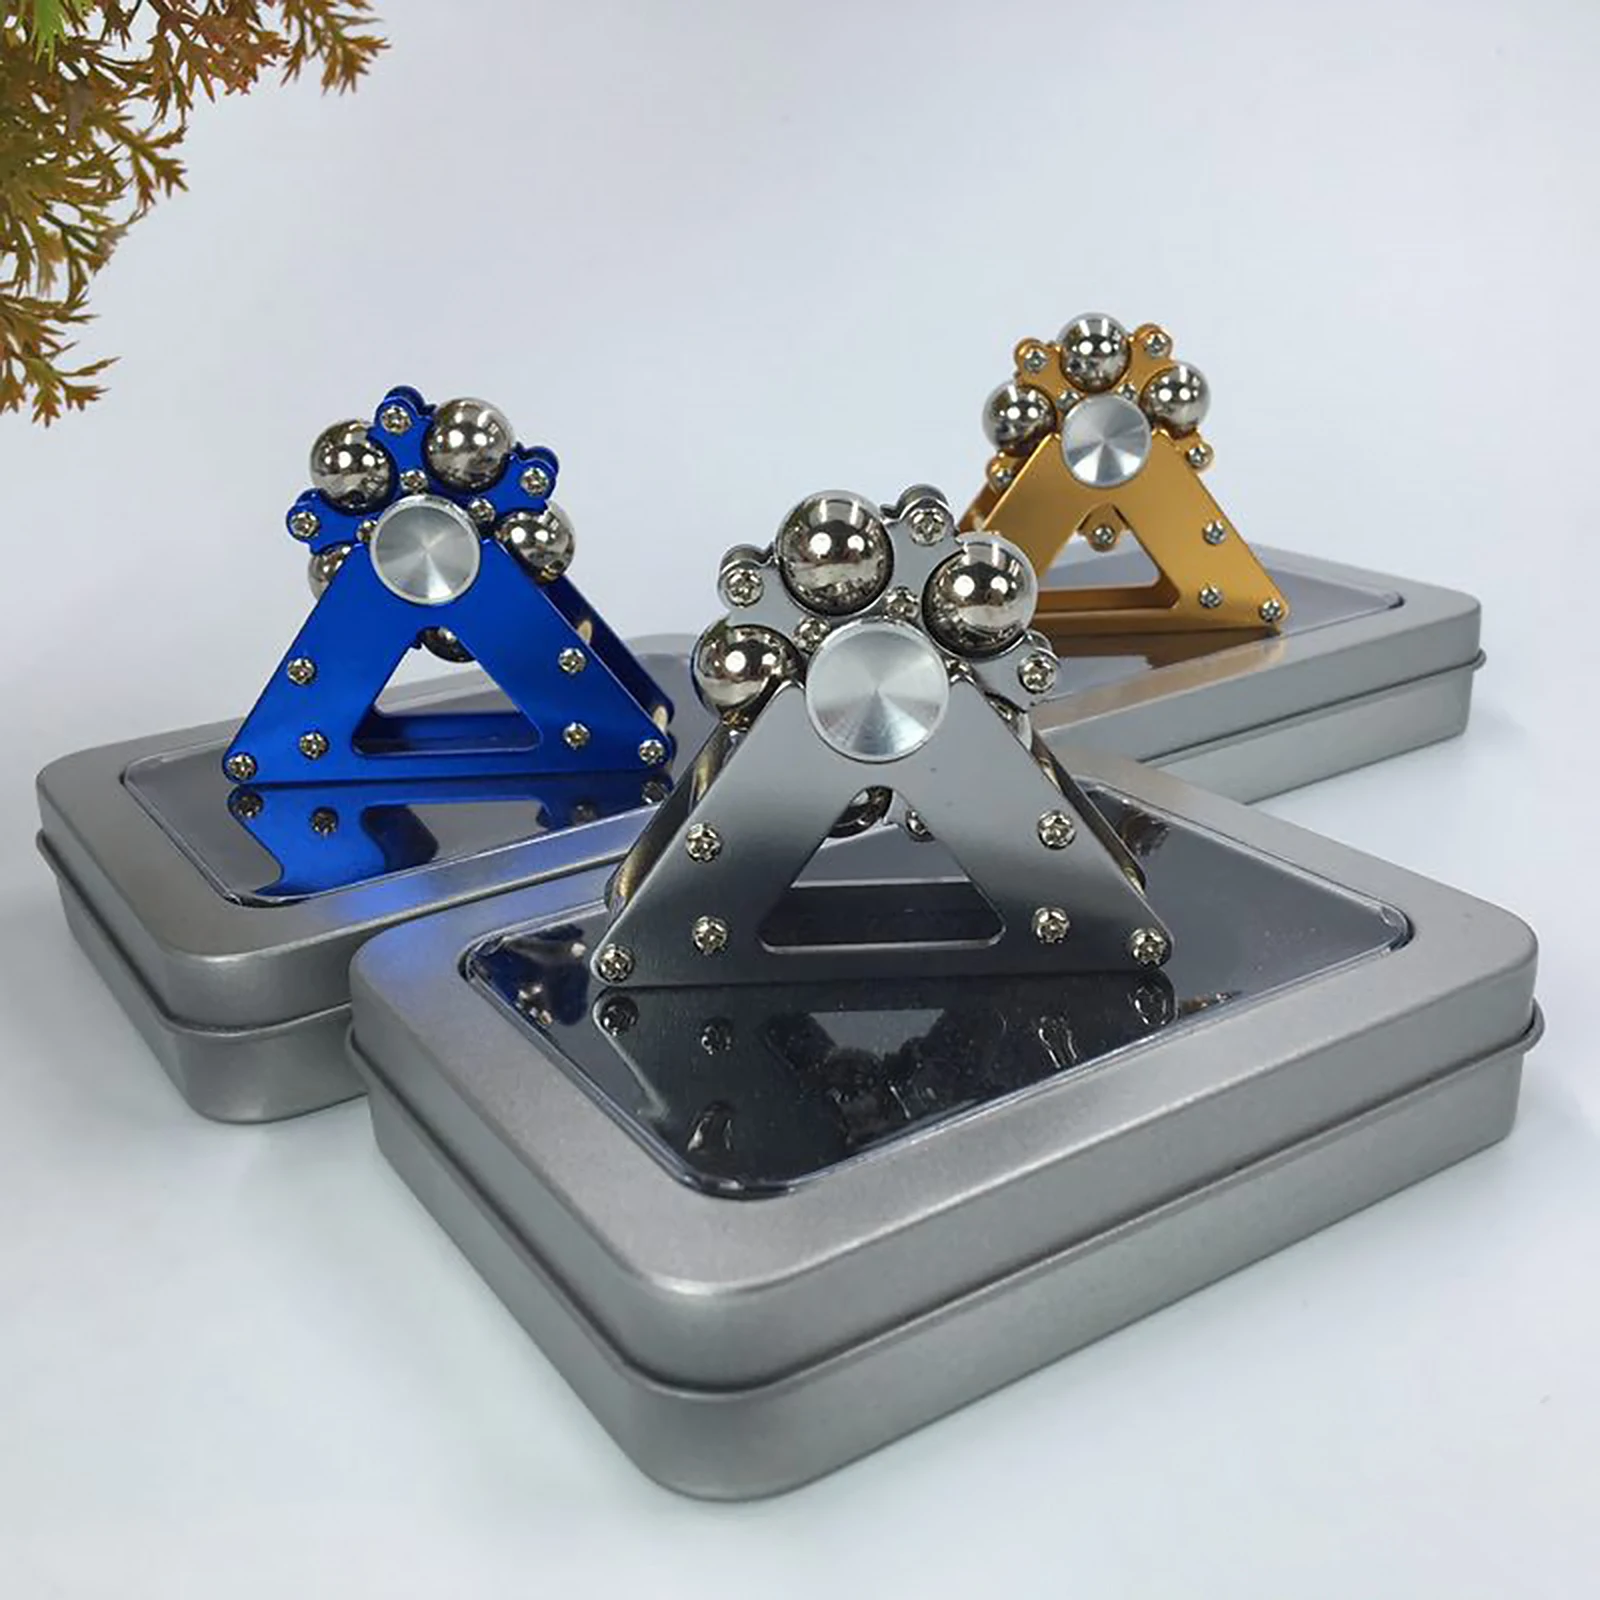 Stress Reliever Toys New Metal Fidget Spinner Antistress Hand Adult Toys Gyroscope Desktop For Children Gyro Stress Toy Gifts enlarge